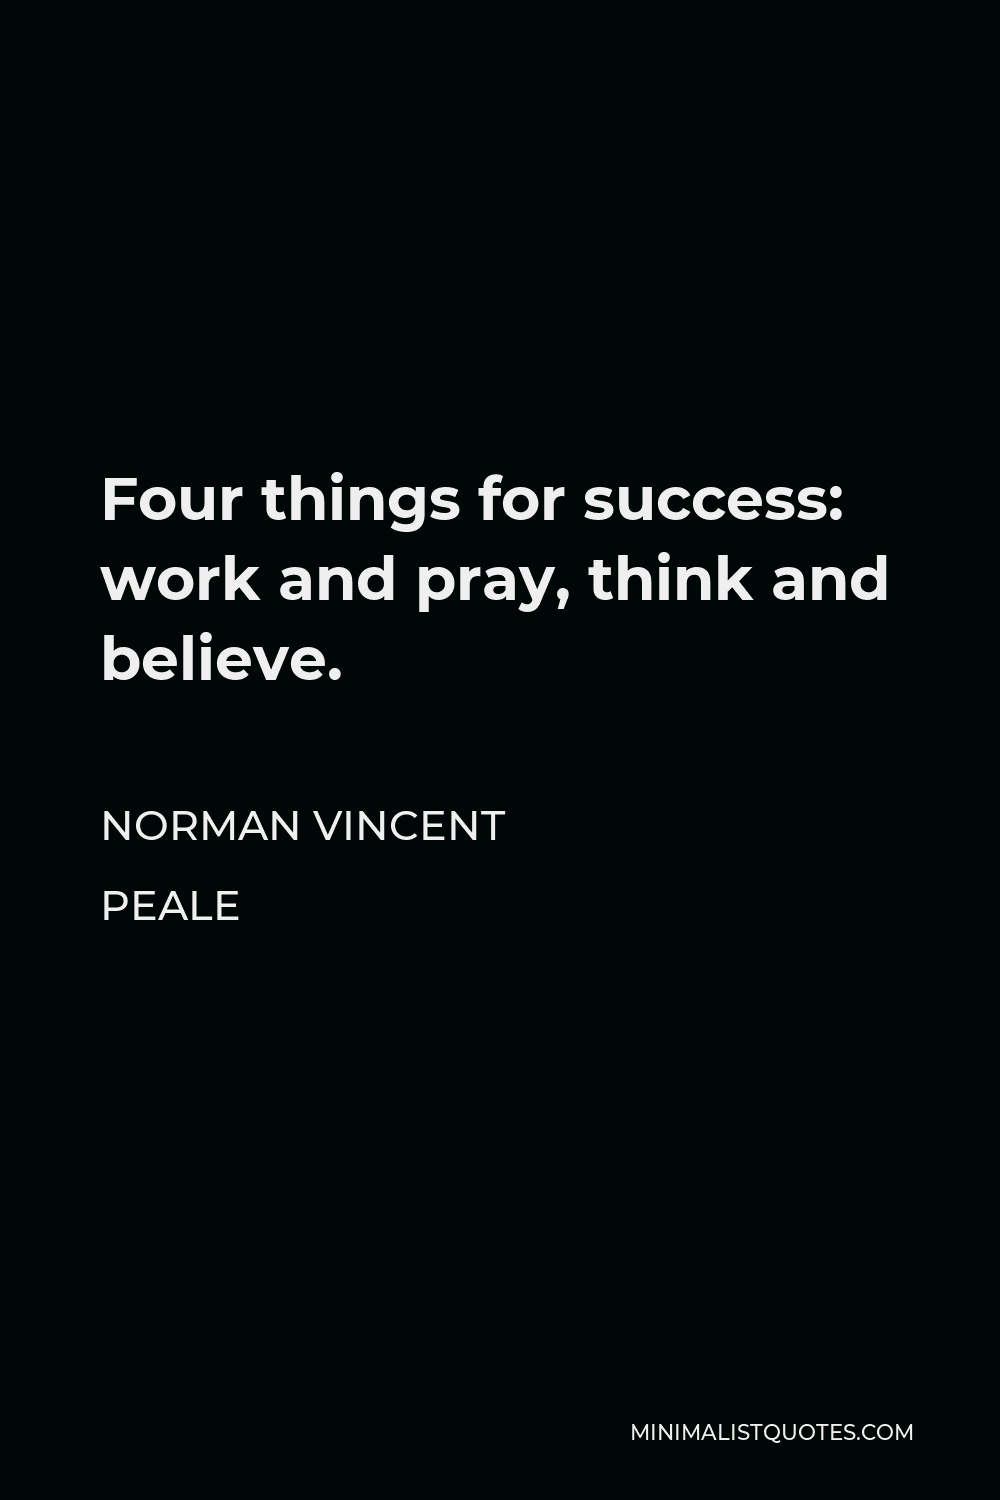 Norman Vincent Peale Quote - Four things for success: work and pray, think and believe.